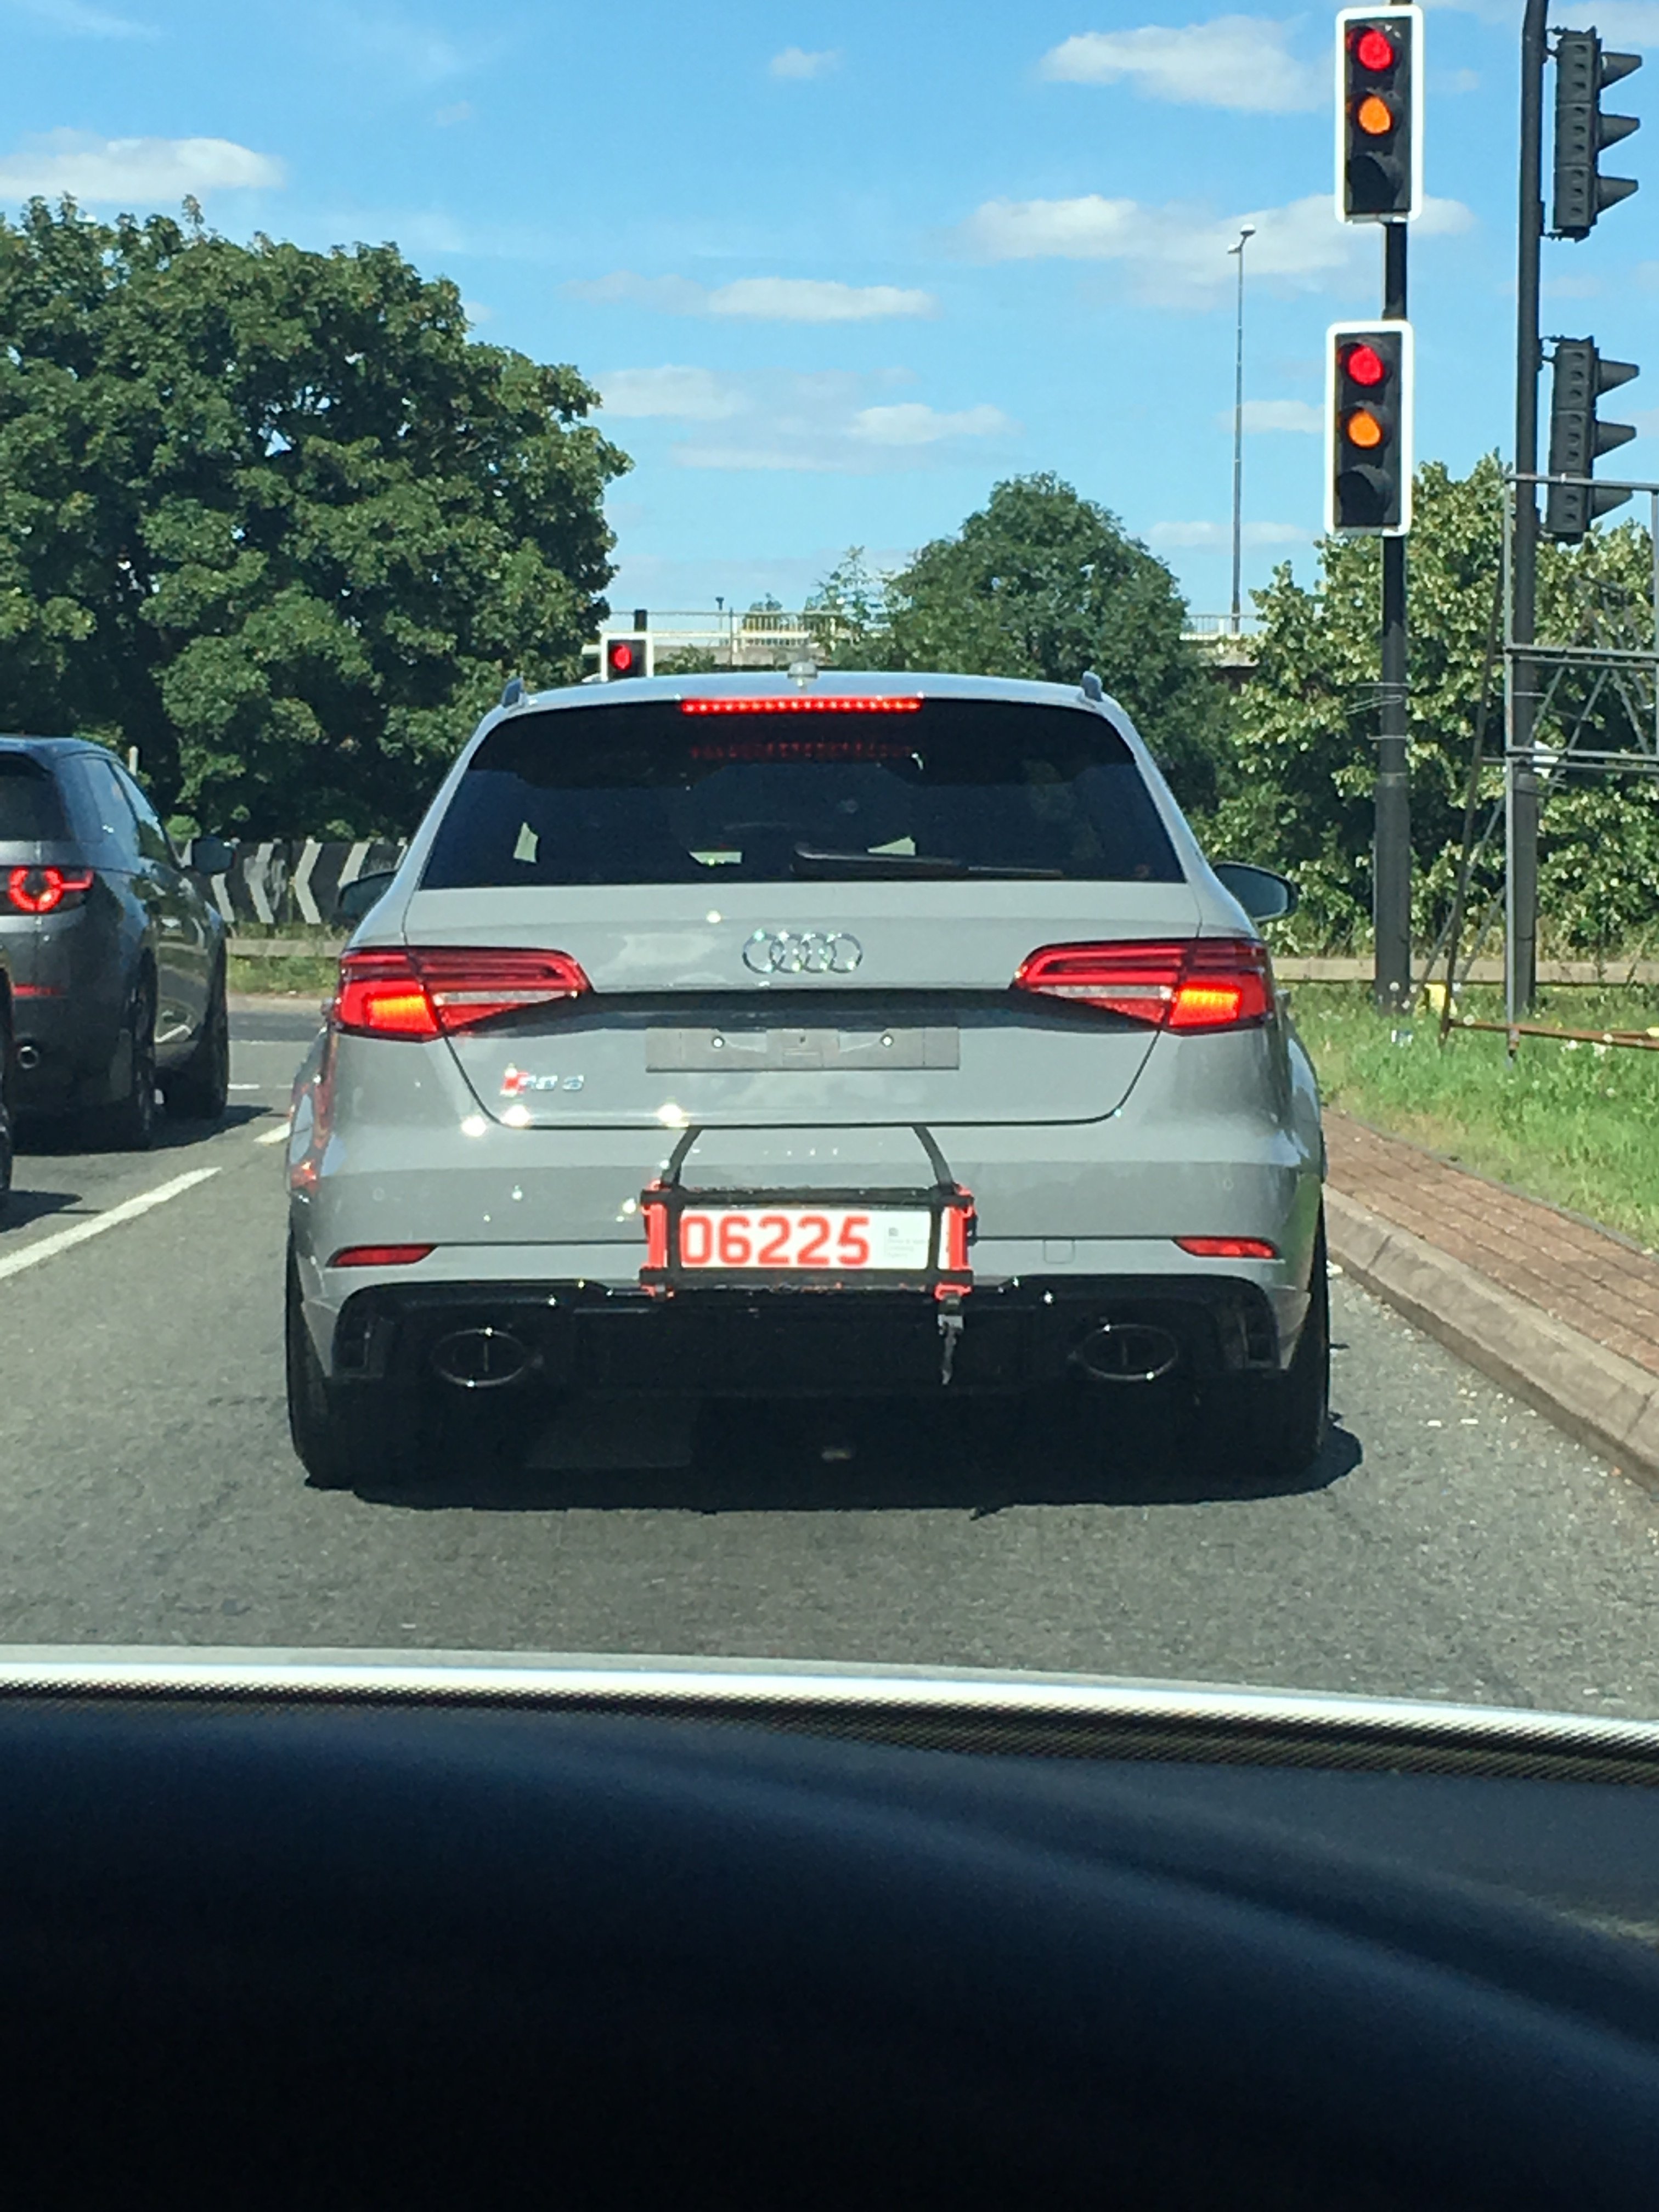 Rs32